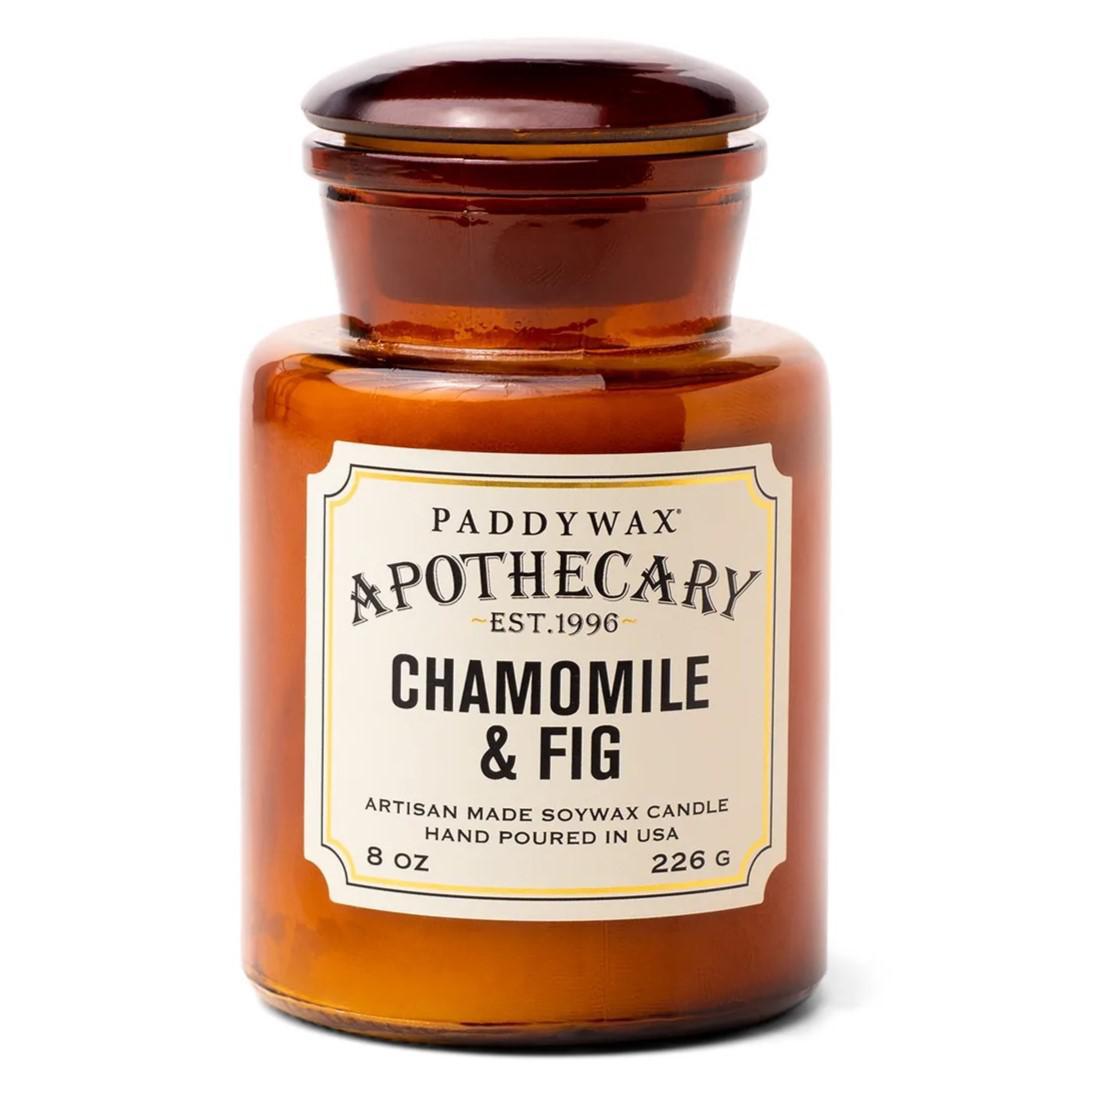 Paddywax - 'Apothecary: Chamomile & Fig' Candle (8OZ) - The Epicurean Trader